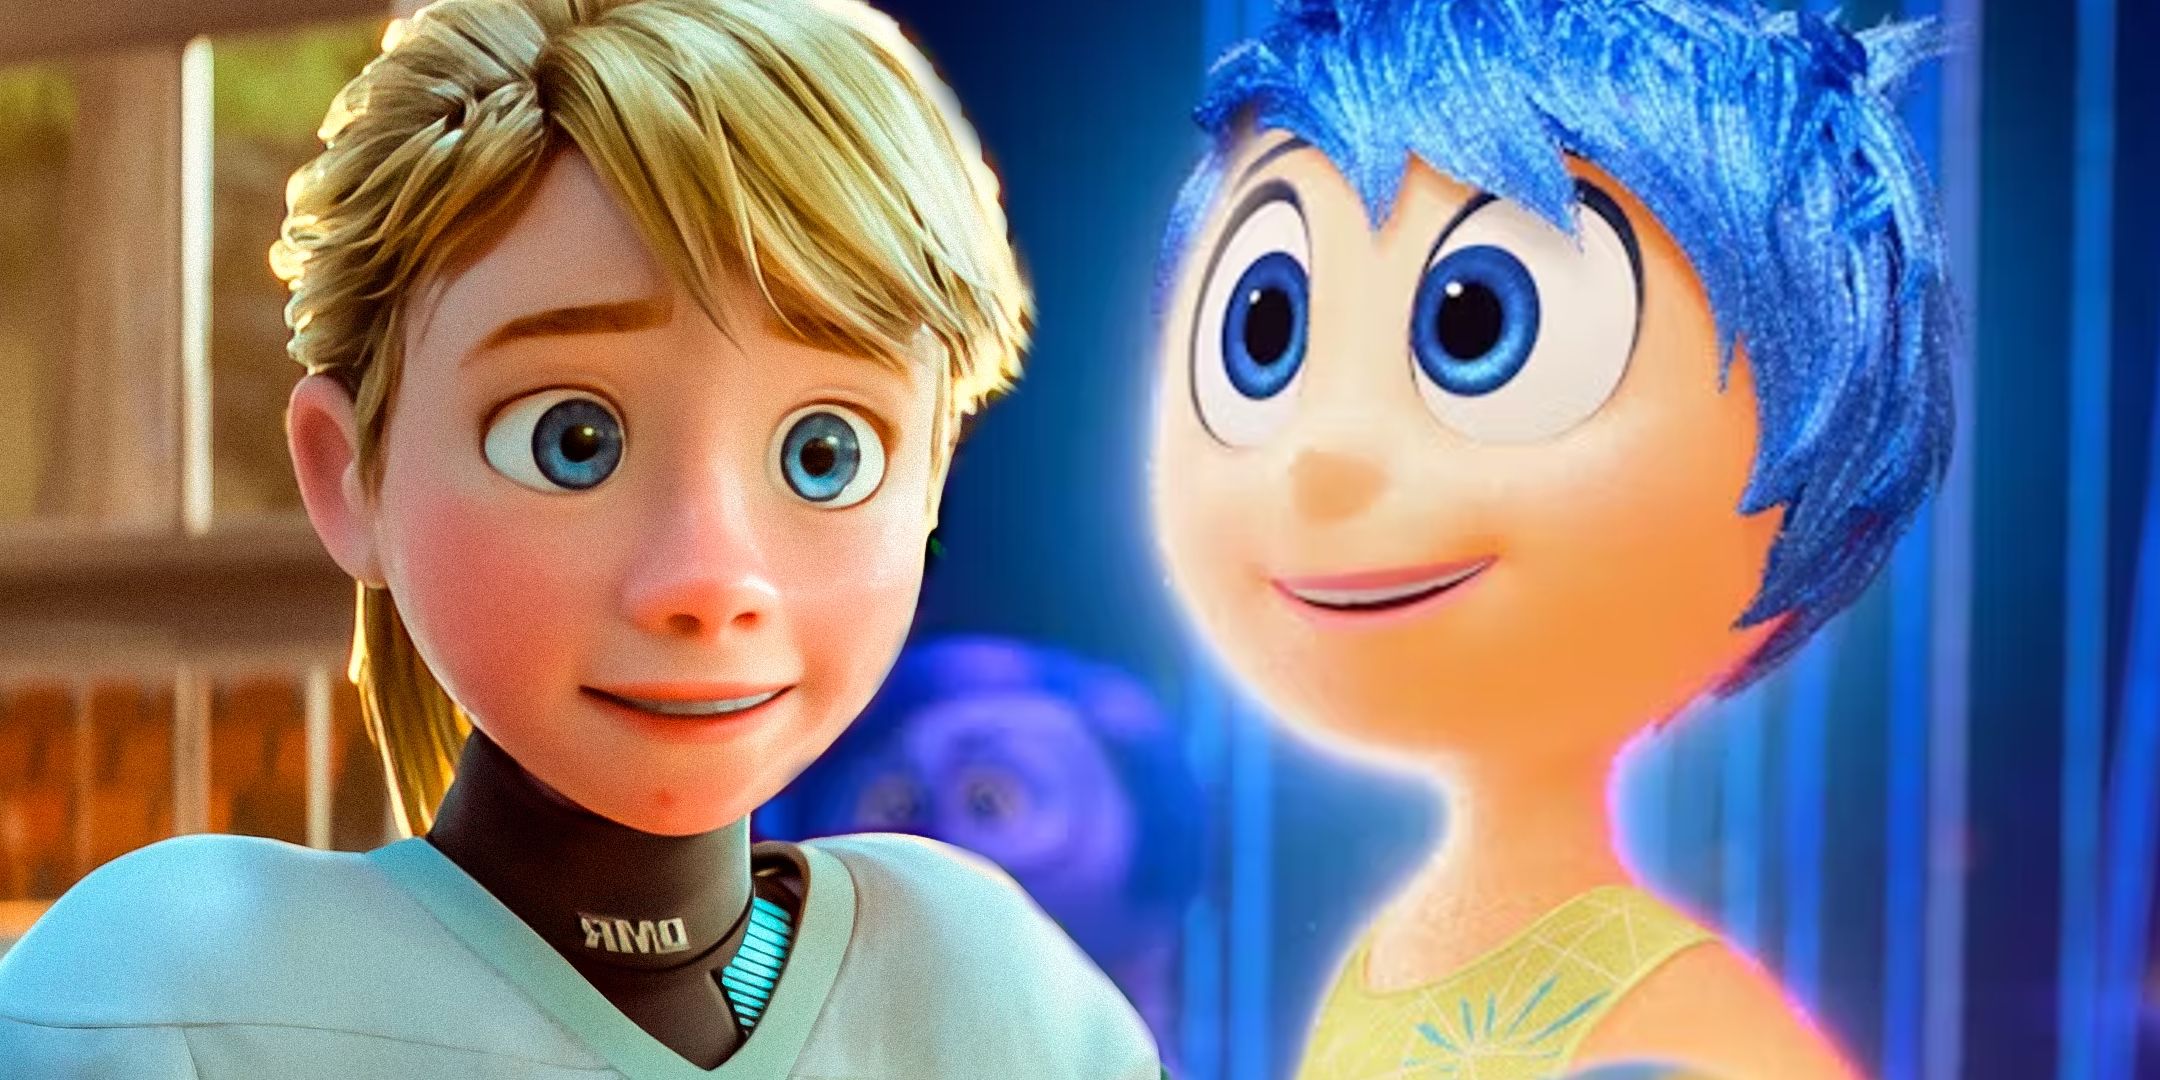 Riley smiling next to Joy smiling in Inside Out 2